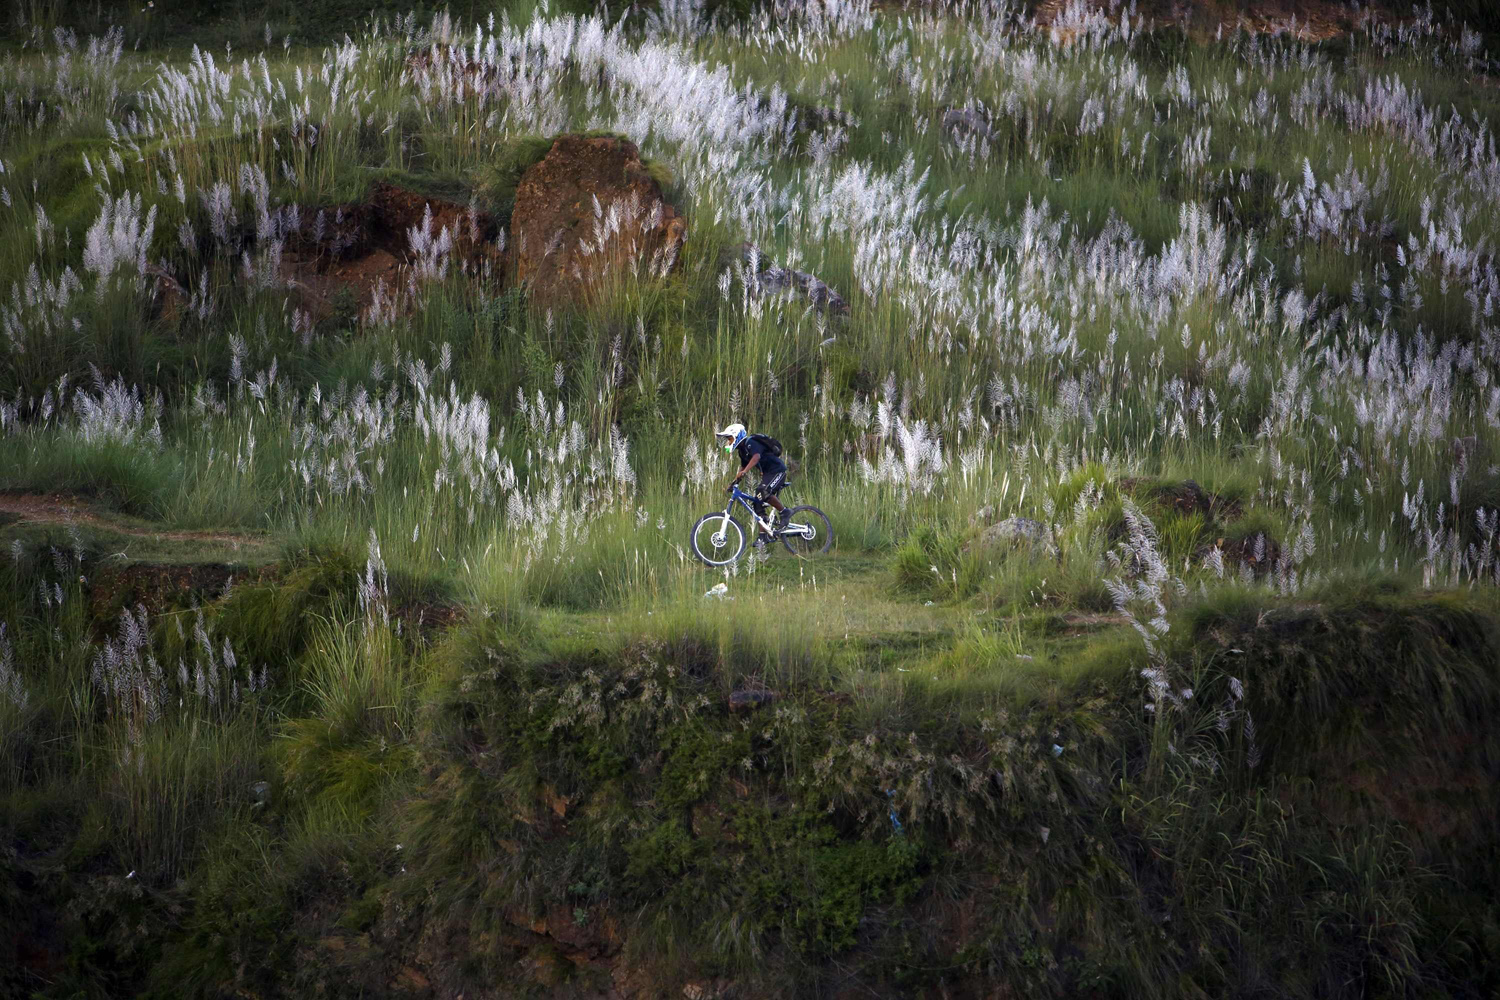 A youth rides a bicycle on the hills in Kathmandu